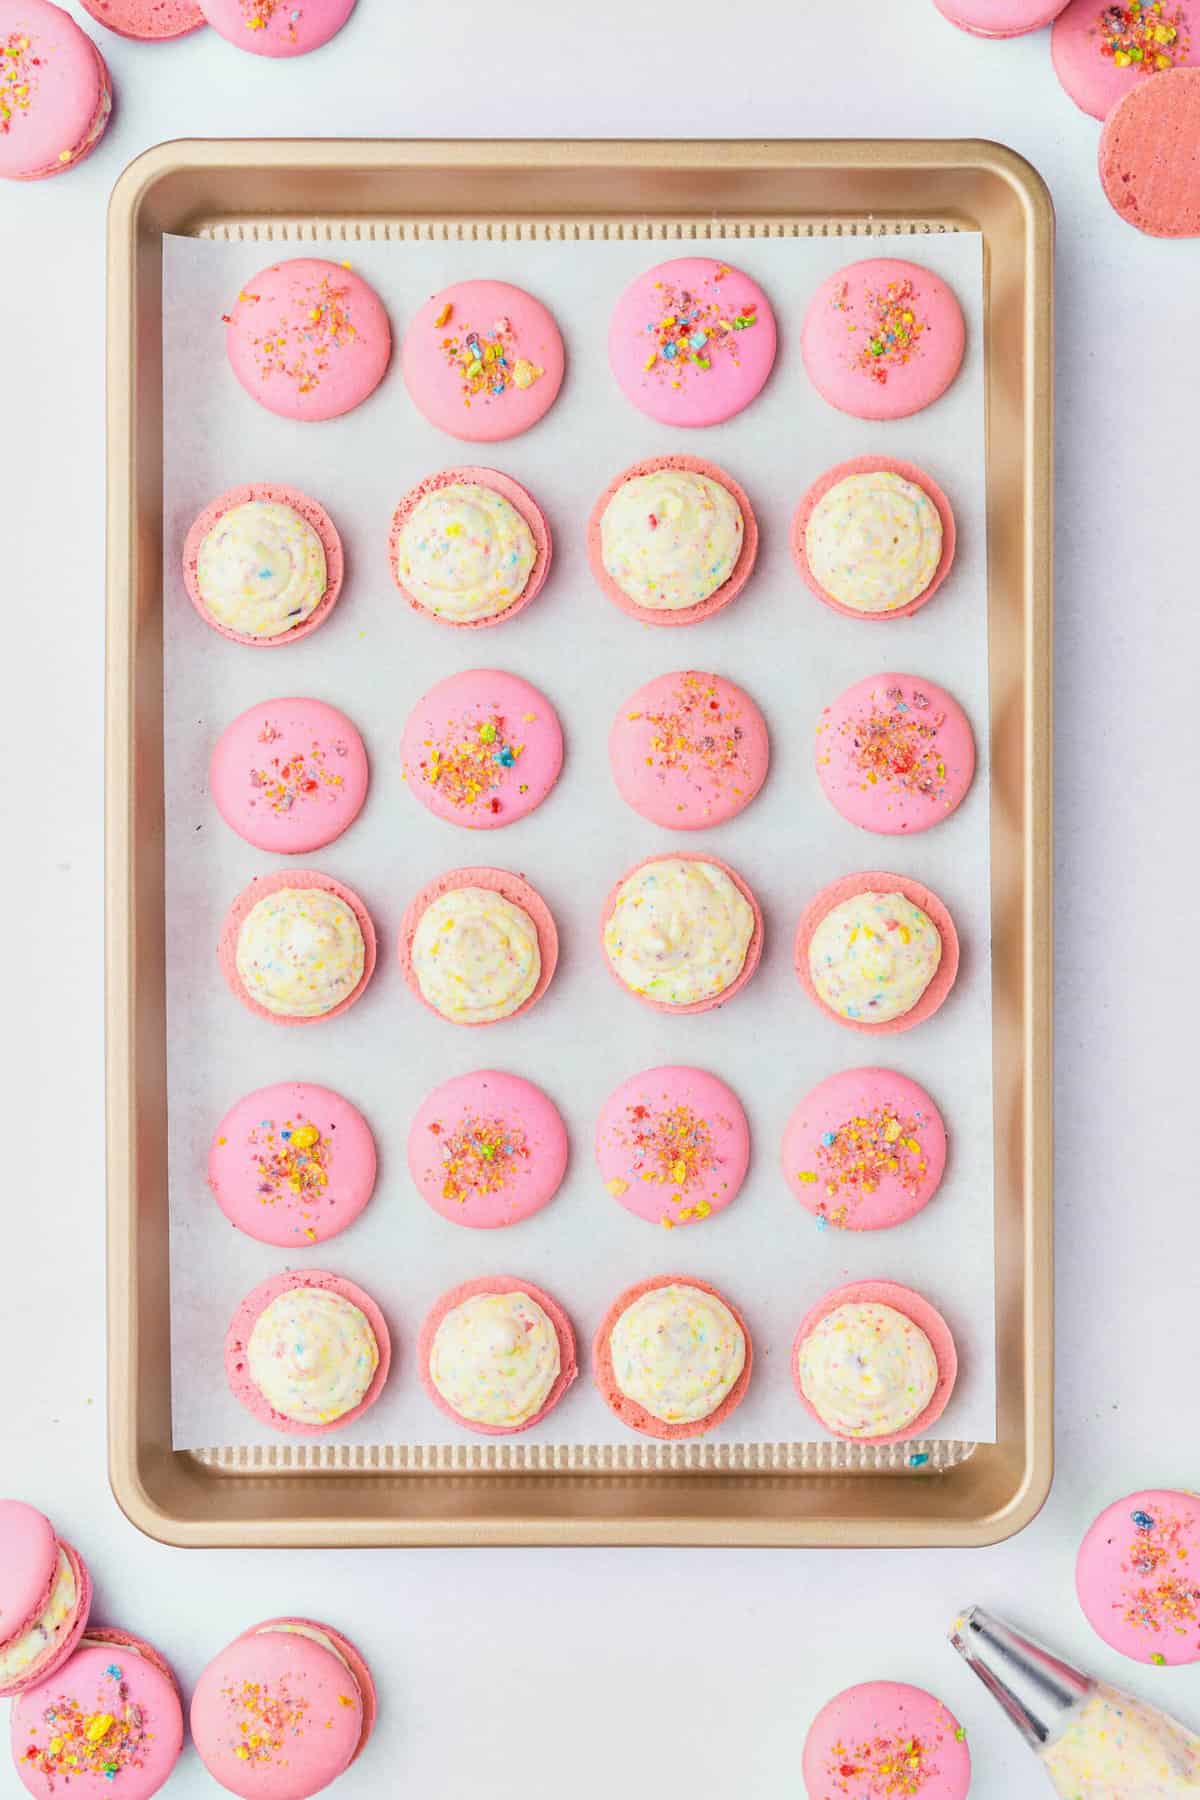 Buttercream frosting piped onto pink macarons.